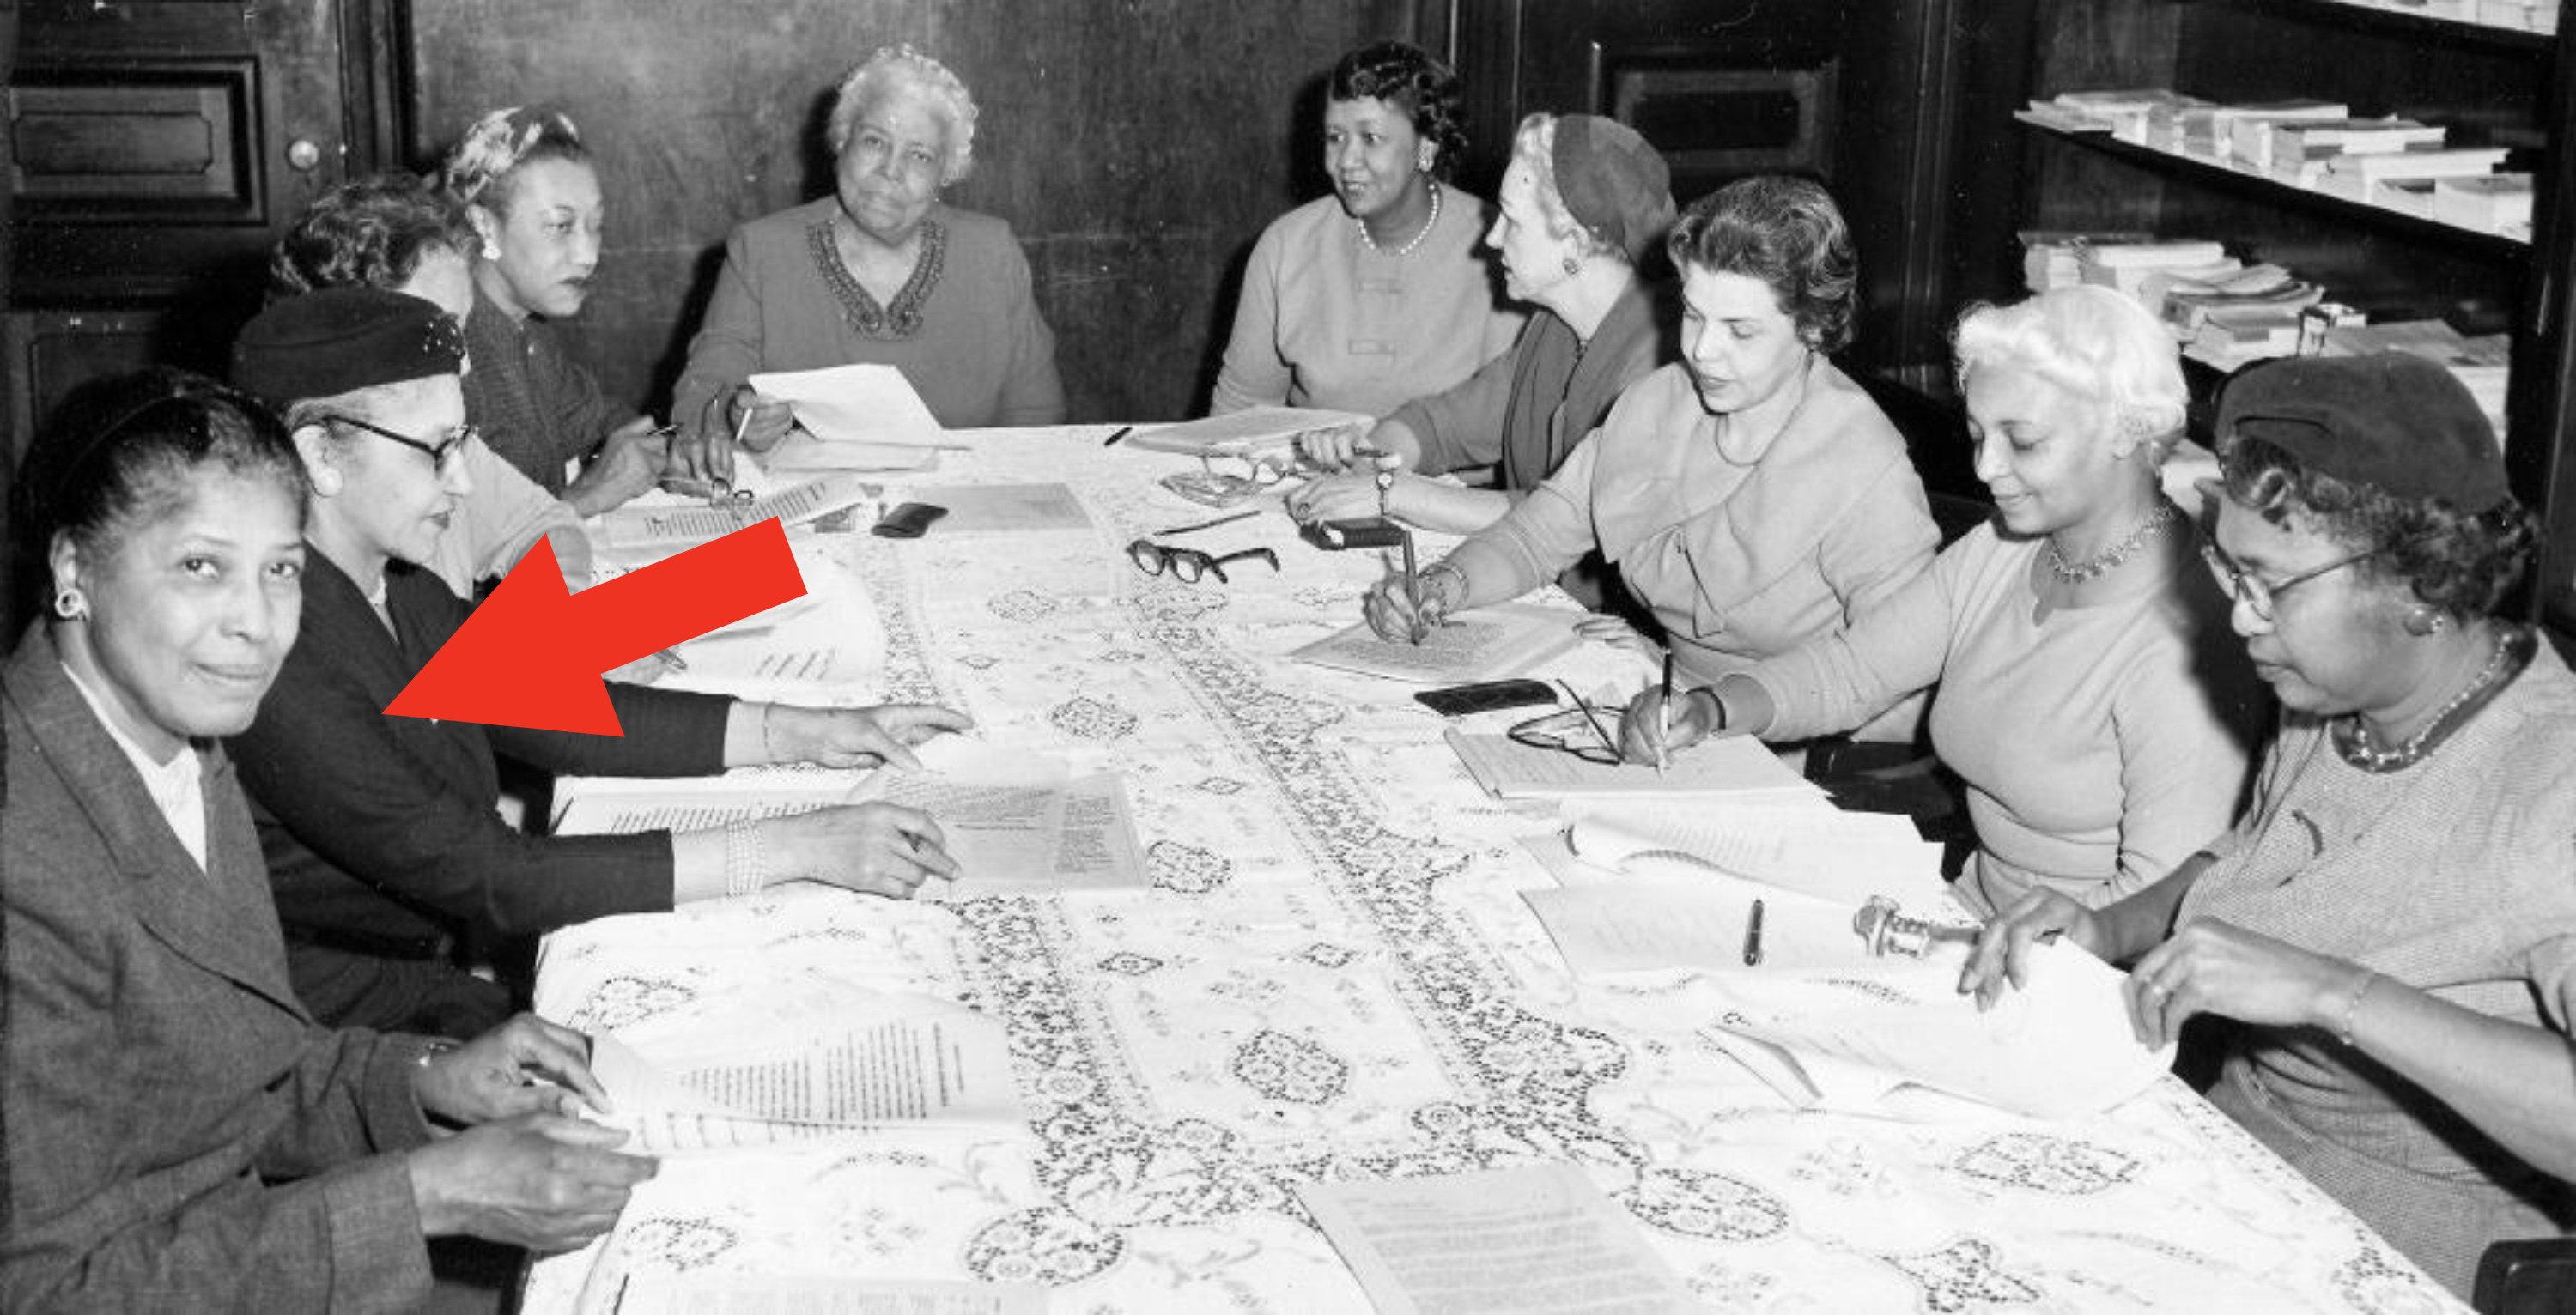 arrow pointing to dorothy sitting at a table full of other women